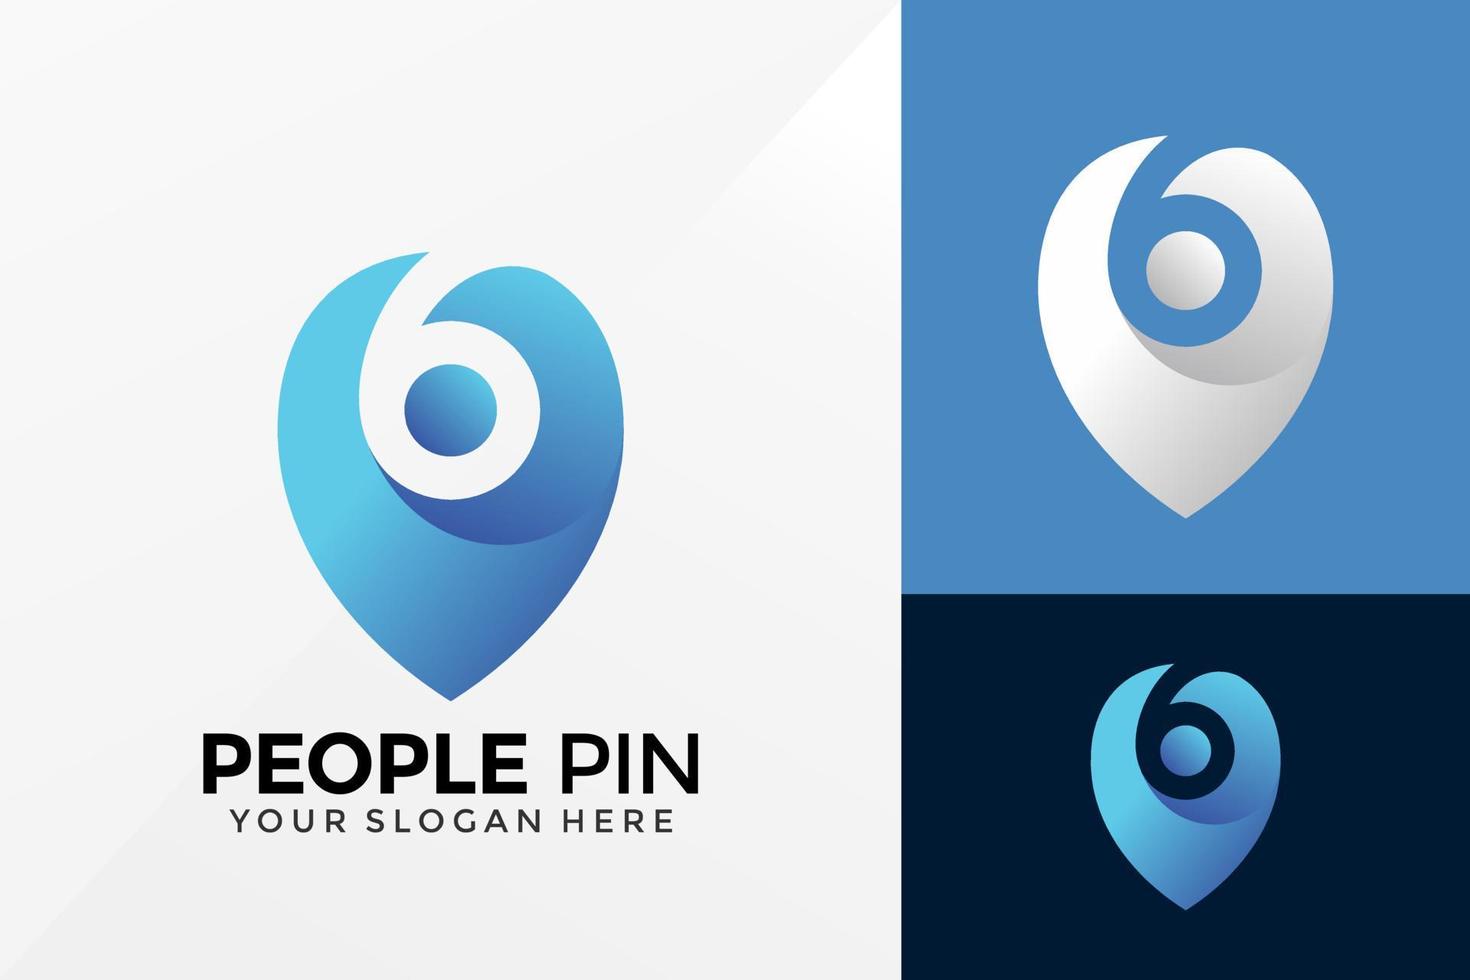 People Pin Location Logo Vector Design. Brand Identity emblem, designs concept, logos, logotype element for template.